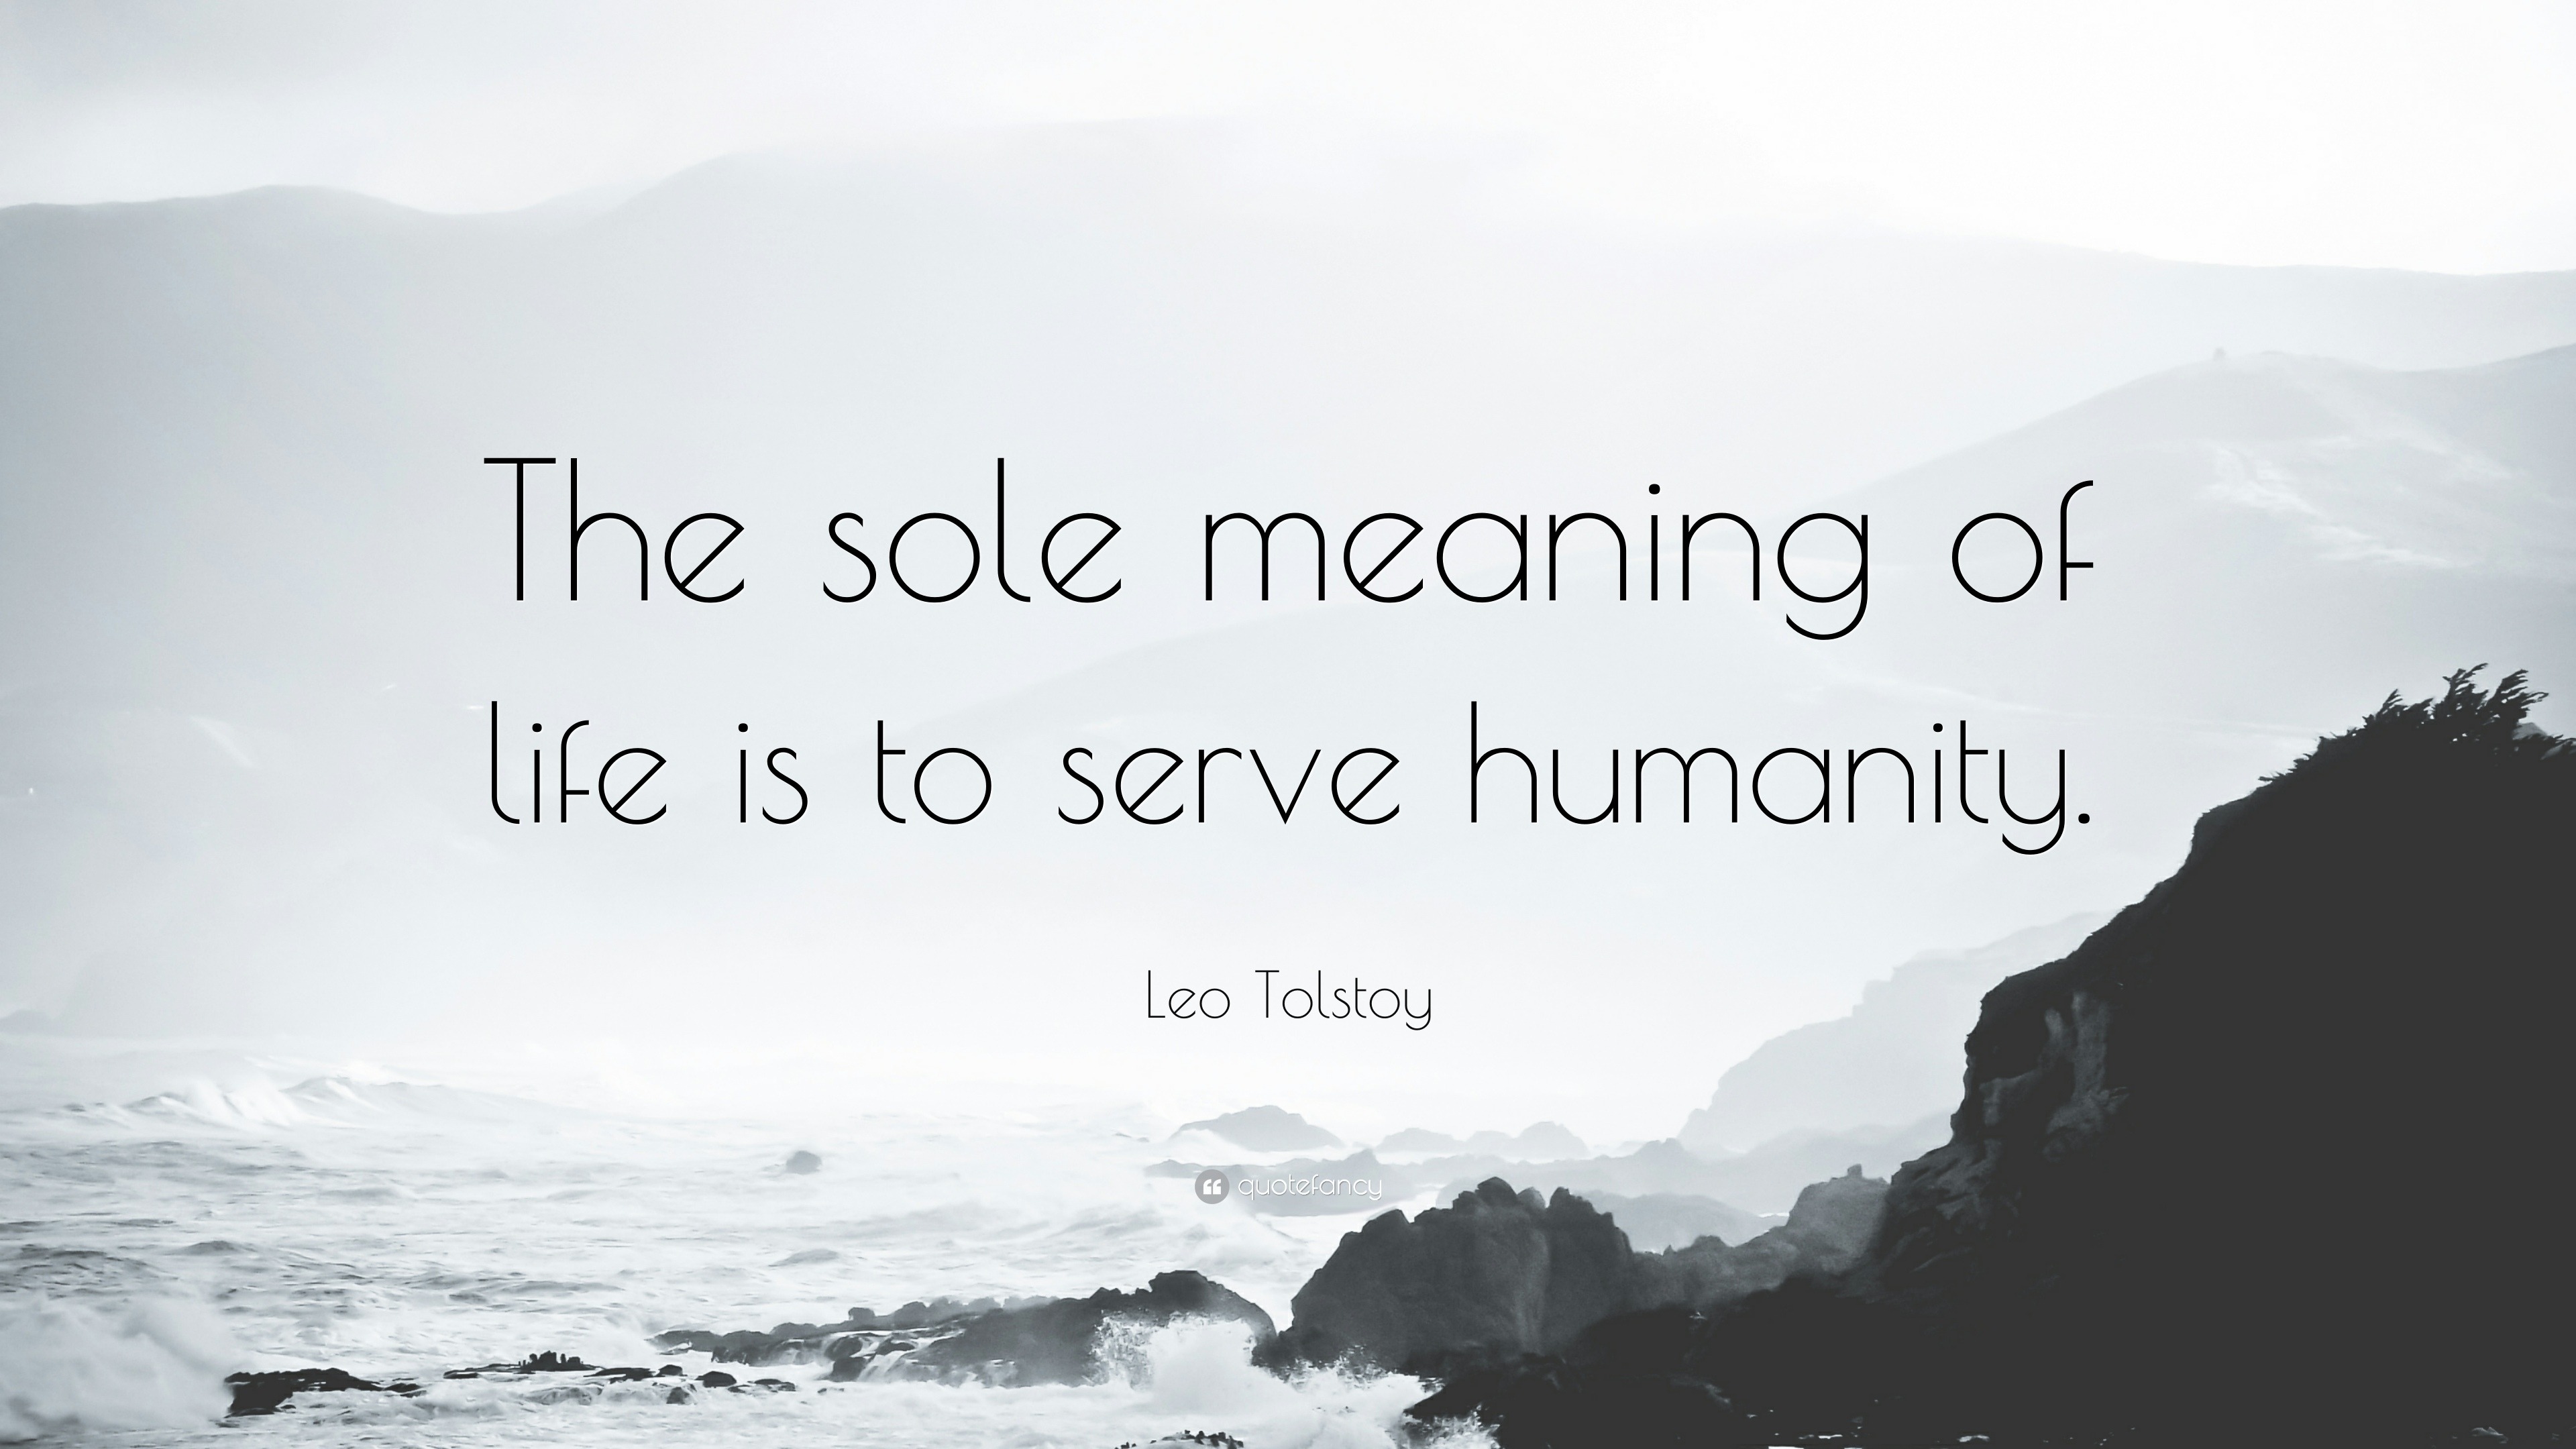 Leo Tolstoy Quote “The sole meaning of life is to serve